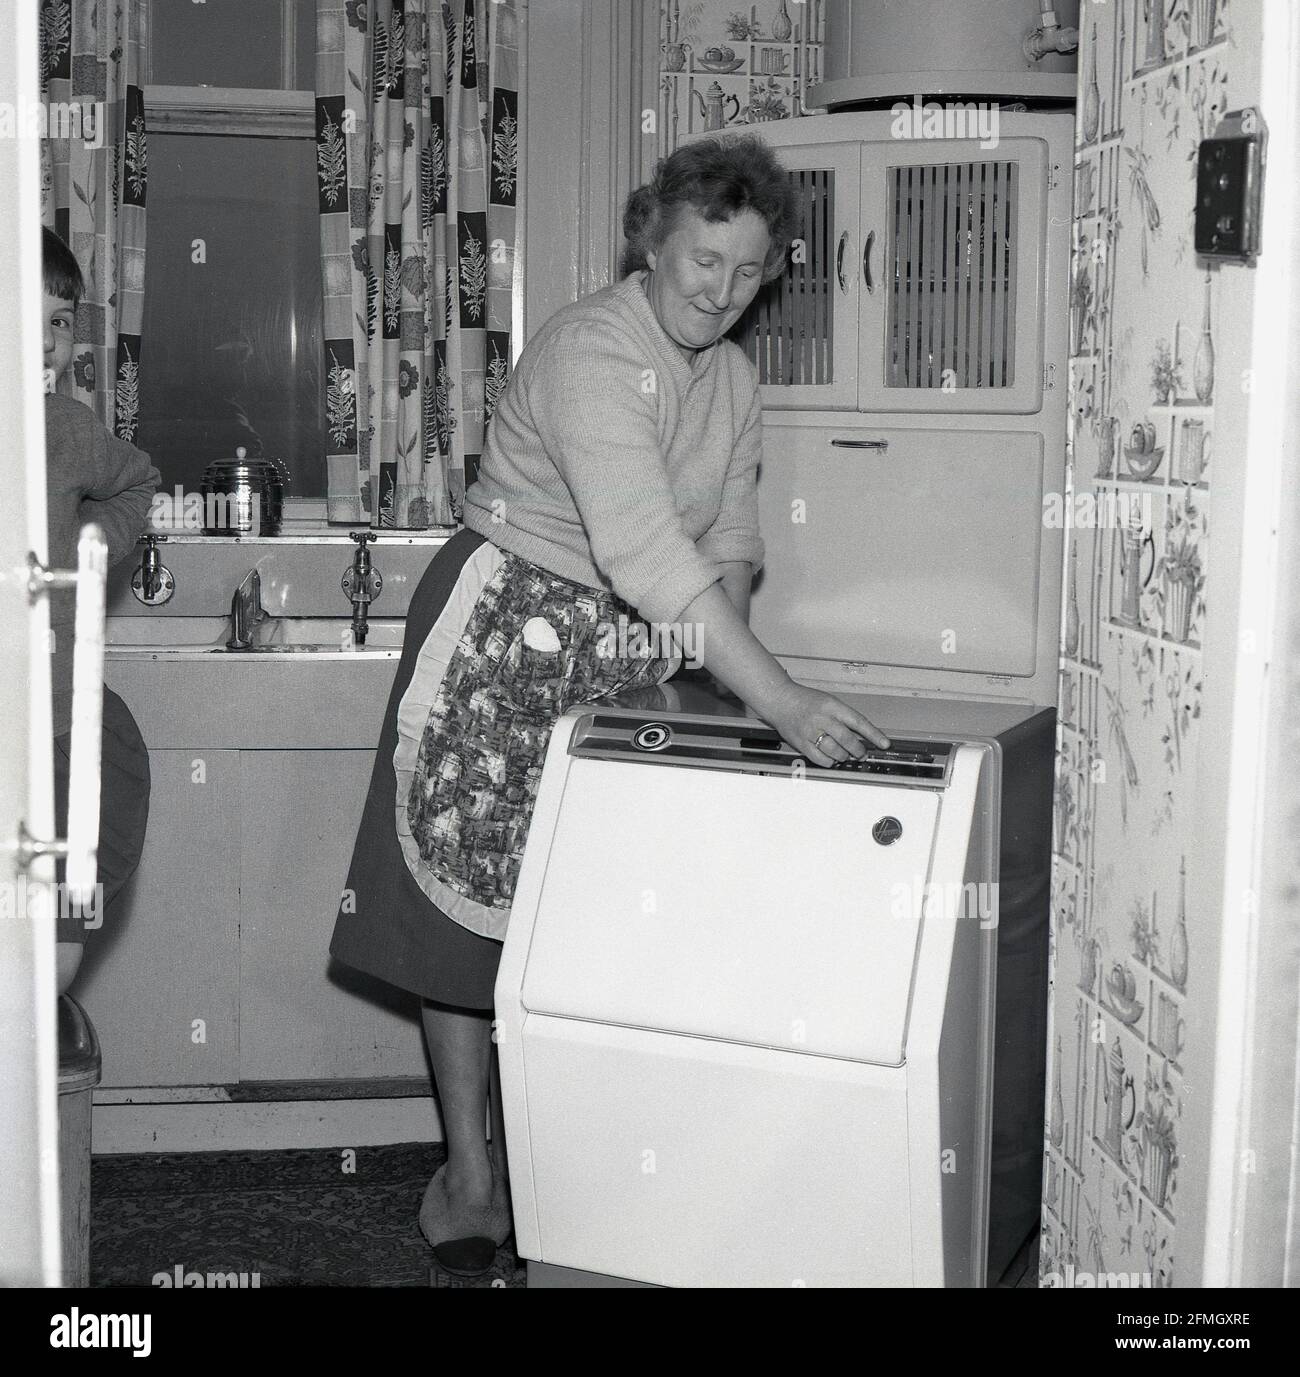 1960s, historical, inside a small kitchen, a blind or partially sighted lady, in an apron for doing her domestic duties, using a new 'braille' washing machine, Kelty, Fife, Scotland. The washing machine had controls in the tactile 'braille' writing system so it could be used by those who were visually impaired. Braille is a touch system in which raised dots or bumps represent the letters of the alphabet. Stock Photo